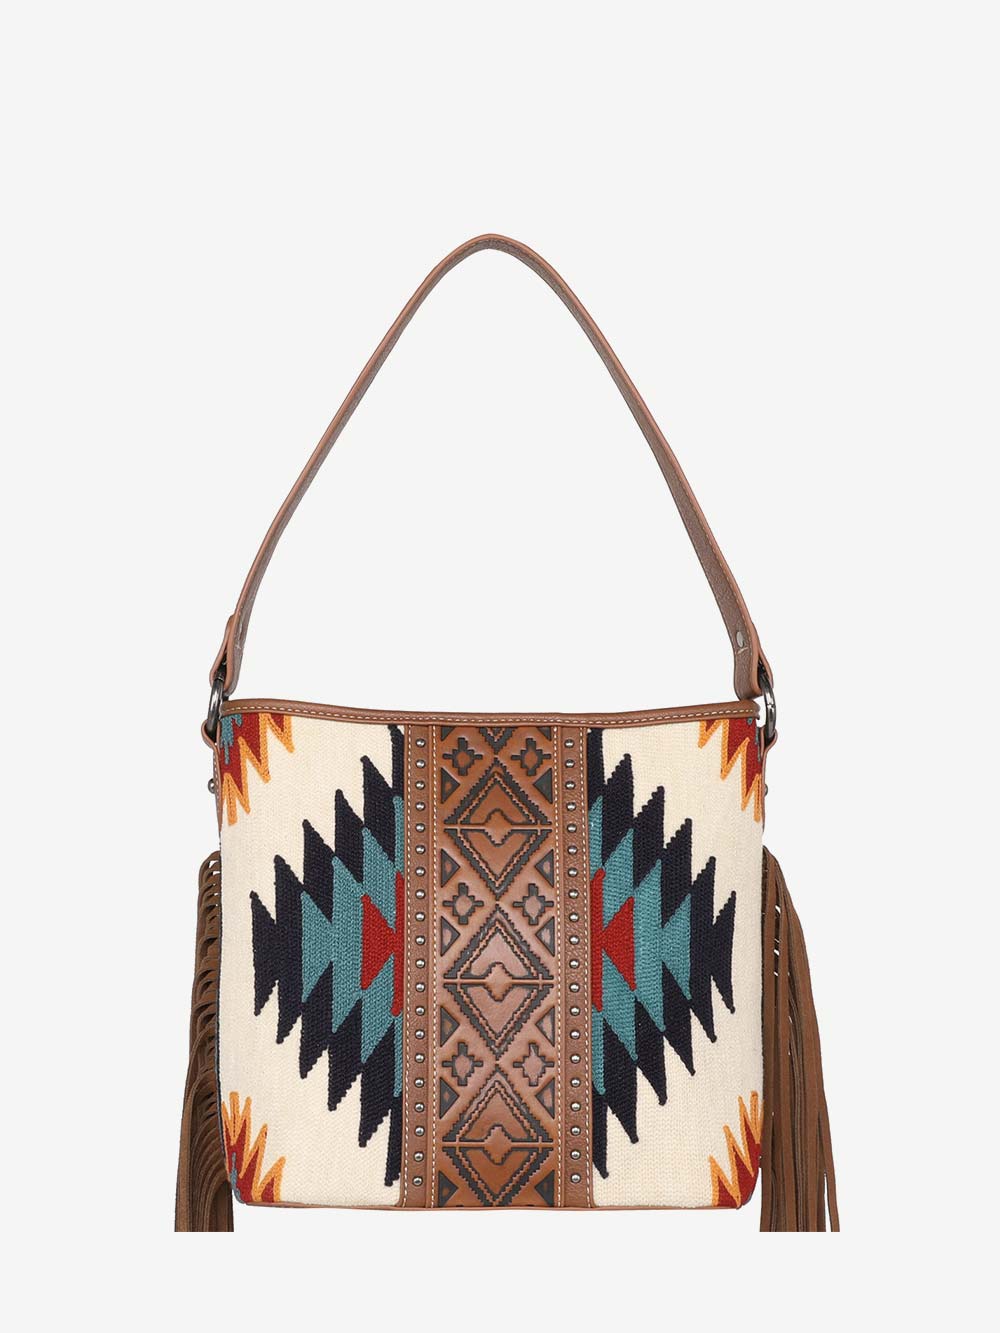 Montana West Aztec Tapestry Fringe Concealed Carry Hobo - Montana West World